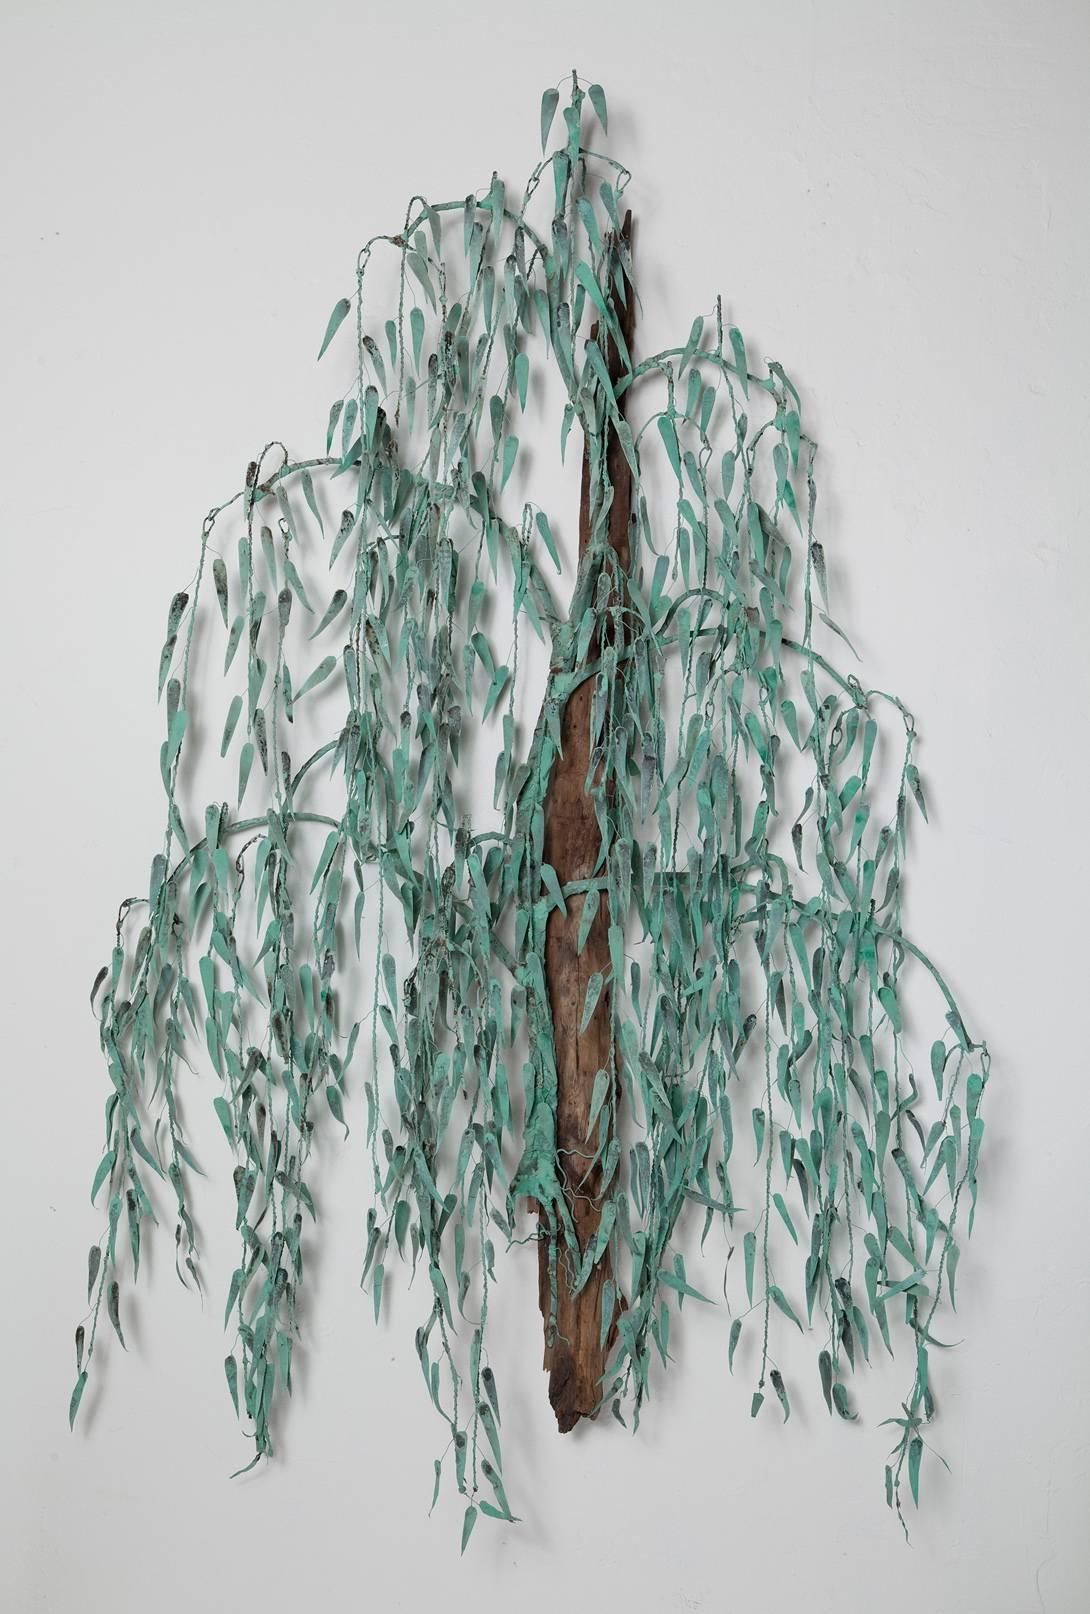 Patinated verdigris copper and natural driftwood combine to give this 1970s willow tree wall sculpture captivating color, texture, and shadow play.